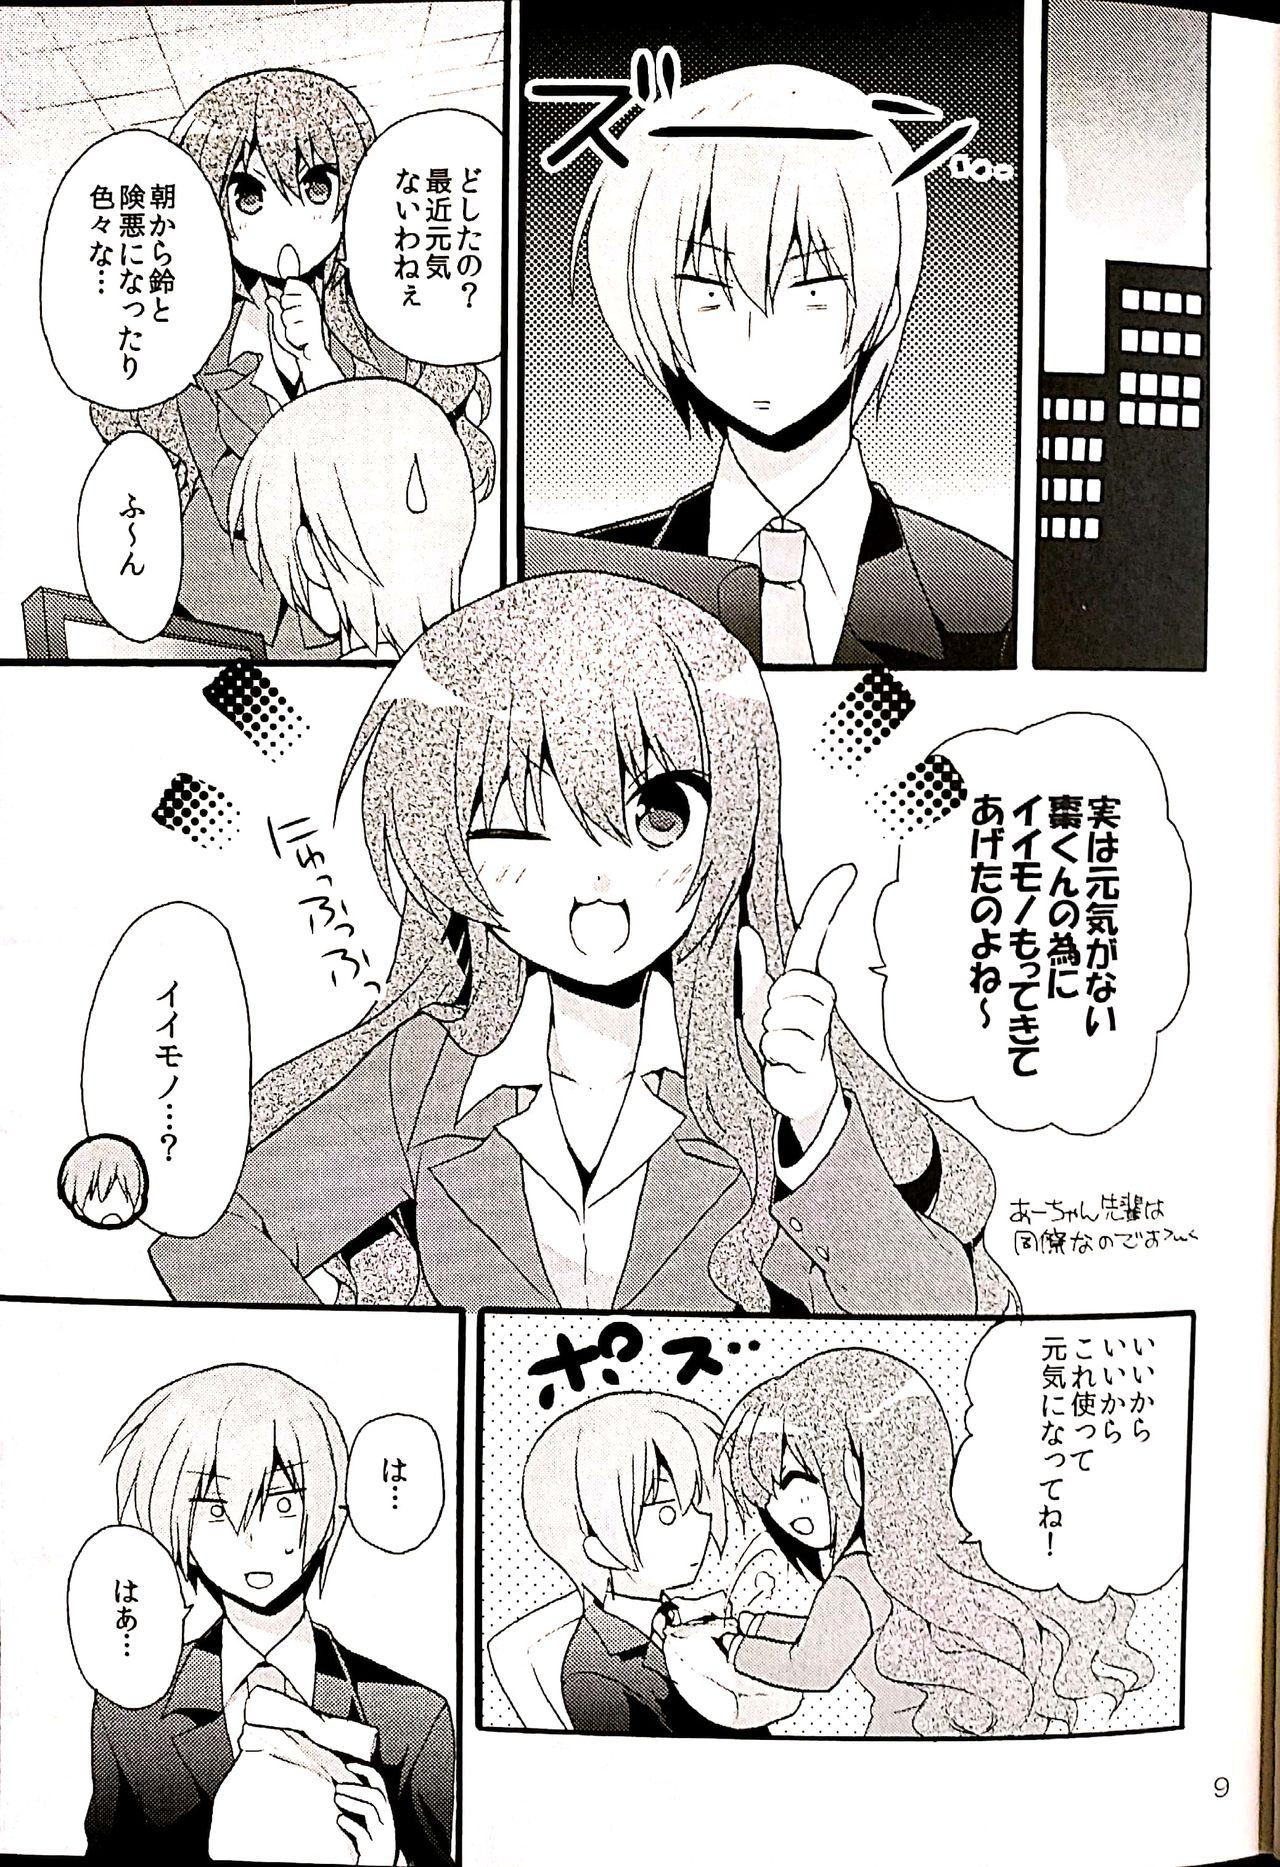 Stepsister Sister Complex! - Little busters Shemales - Page 6